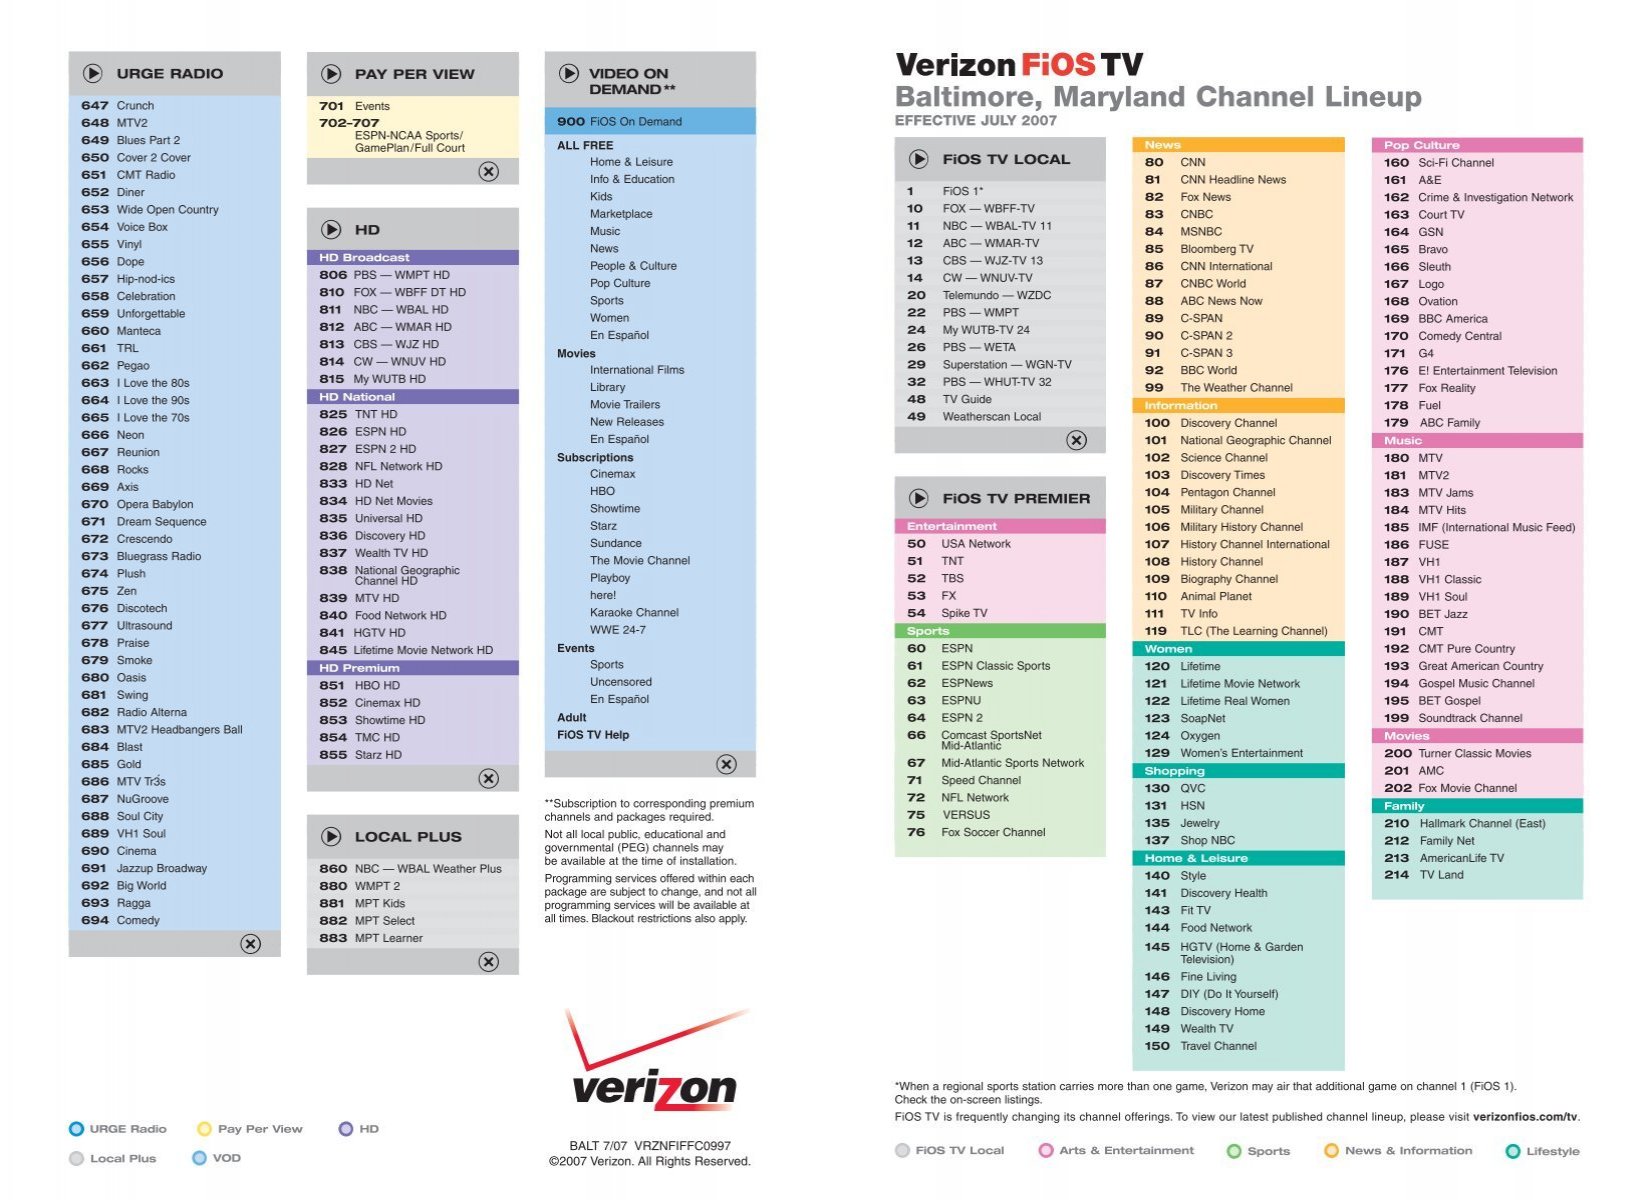 what channel number is cmt on verizon fios